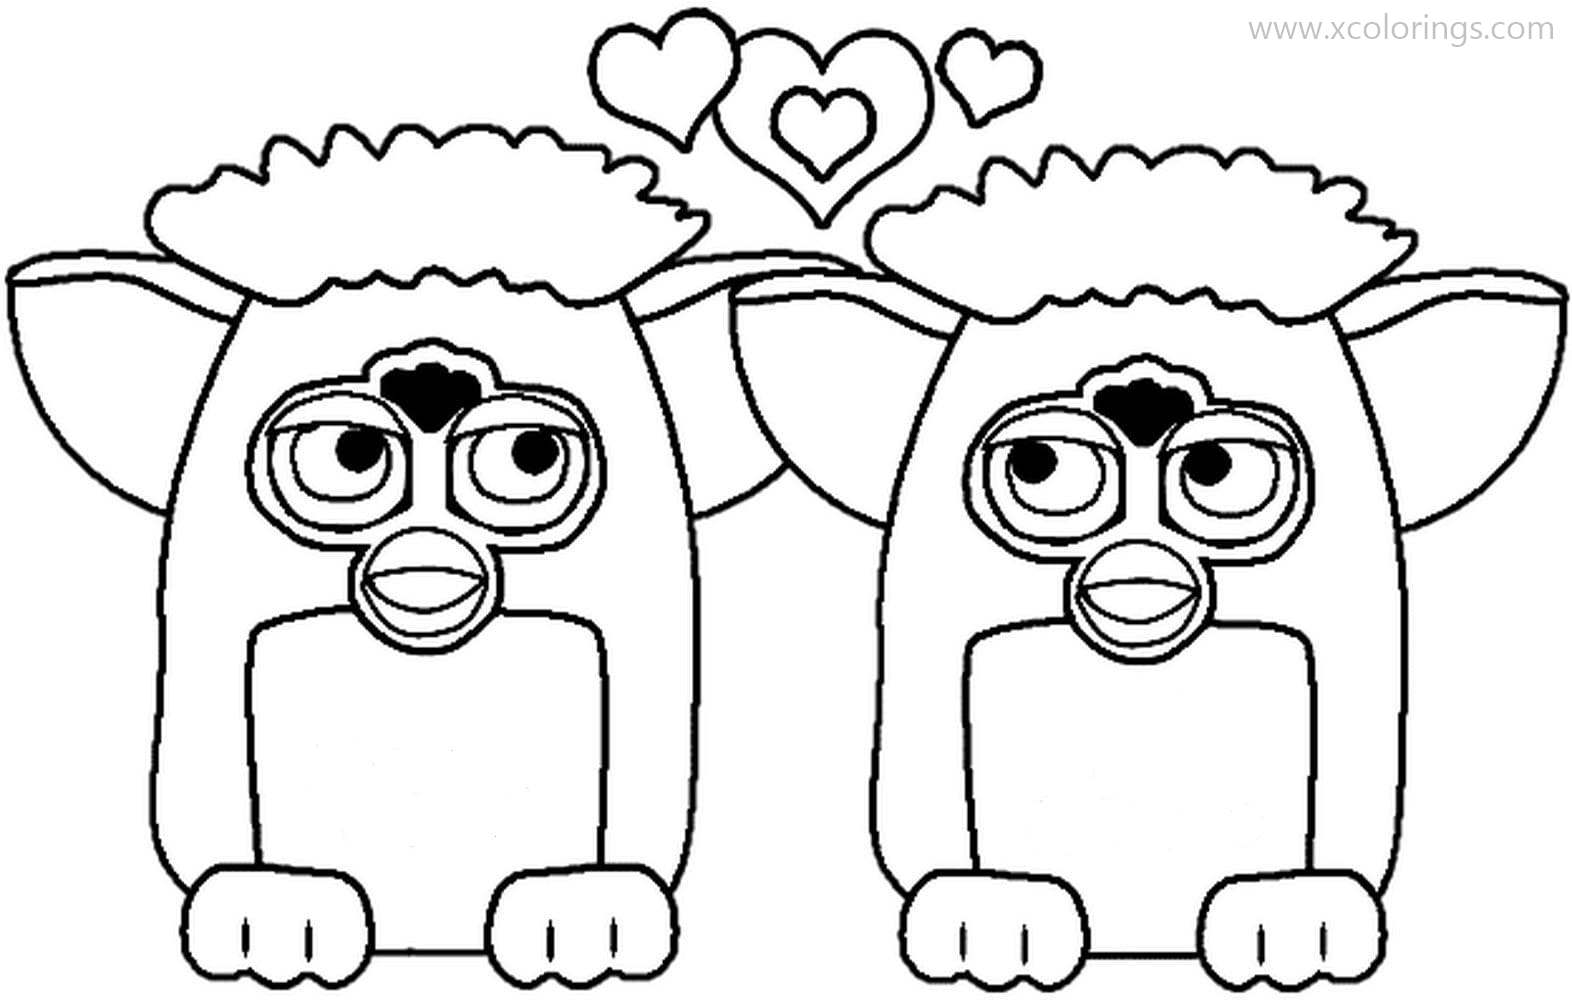 Free Furby Coloring Pages Gorillas Love printable